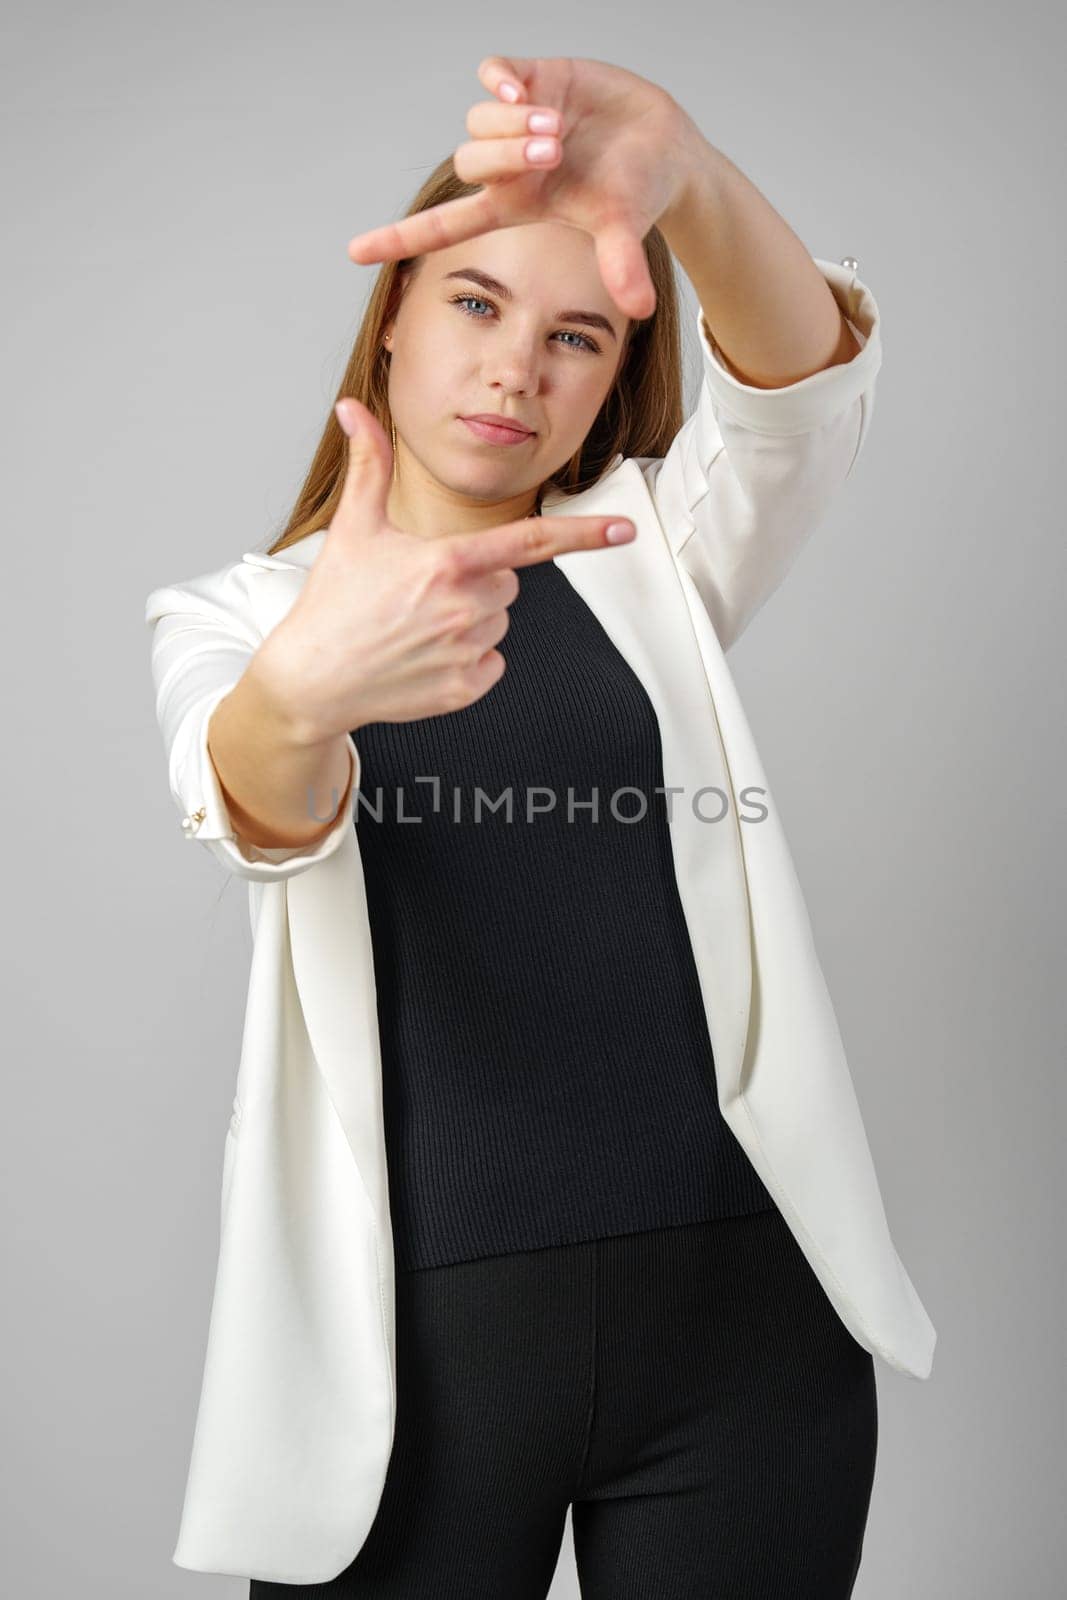 Young Woman Making Frame Gesture With Hands Against a Neutral Background in studio